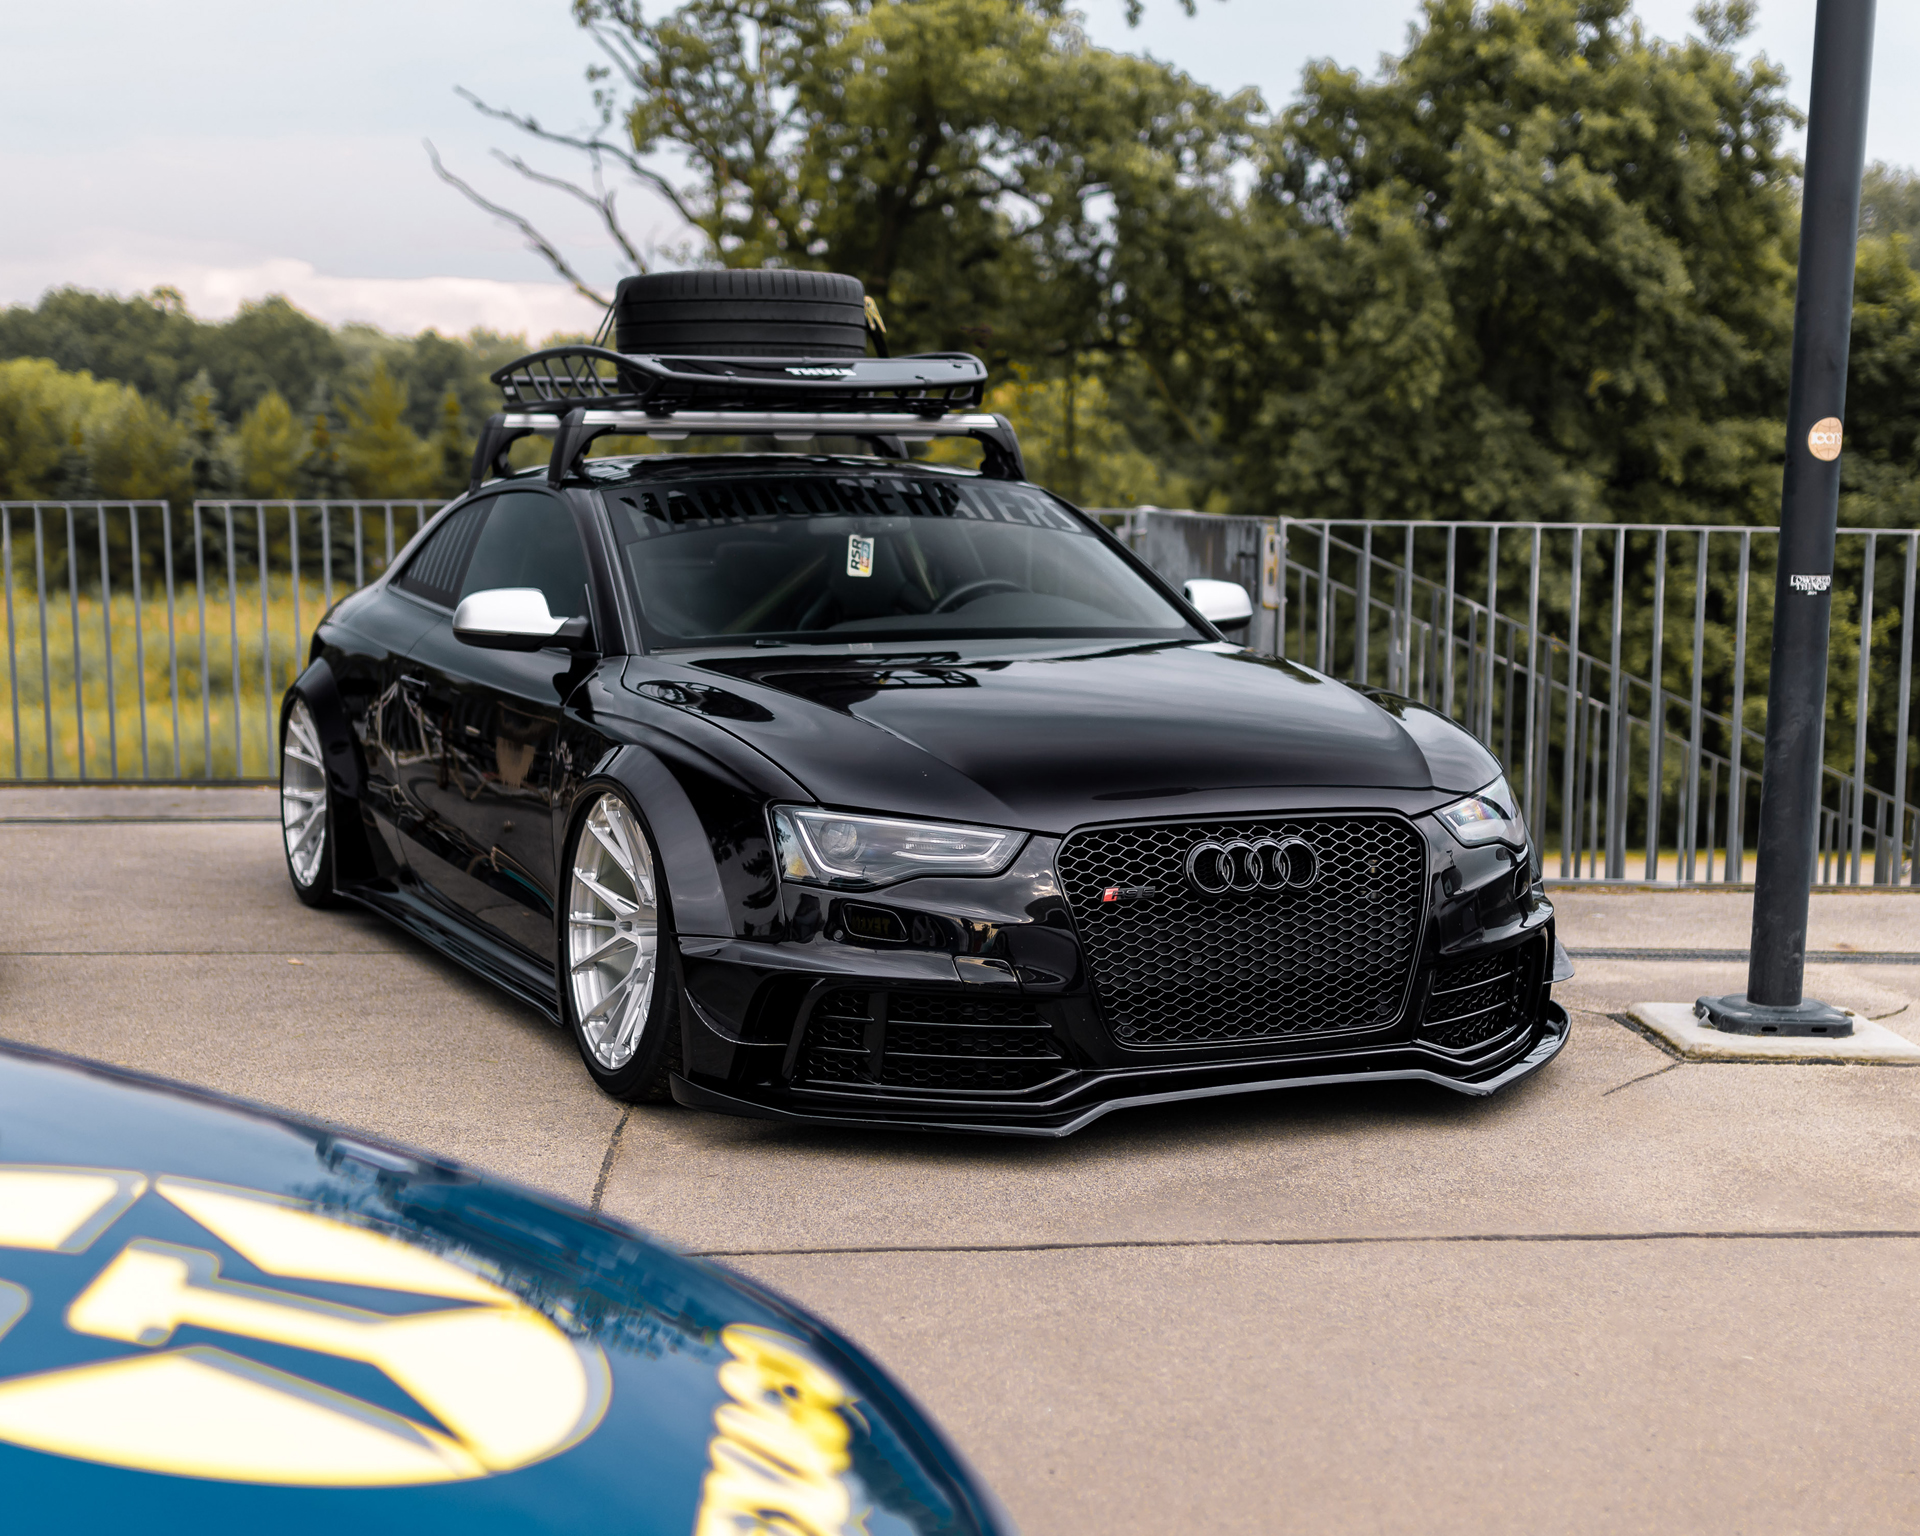 Audi A5 Wide Arch Body Kit Xclusive Conversion Tuning